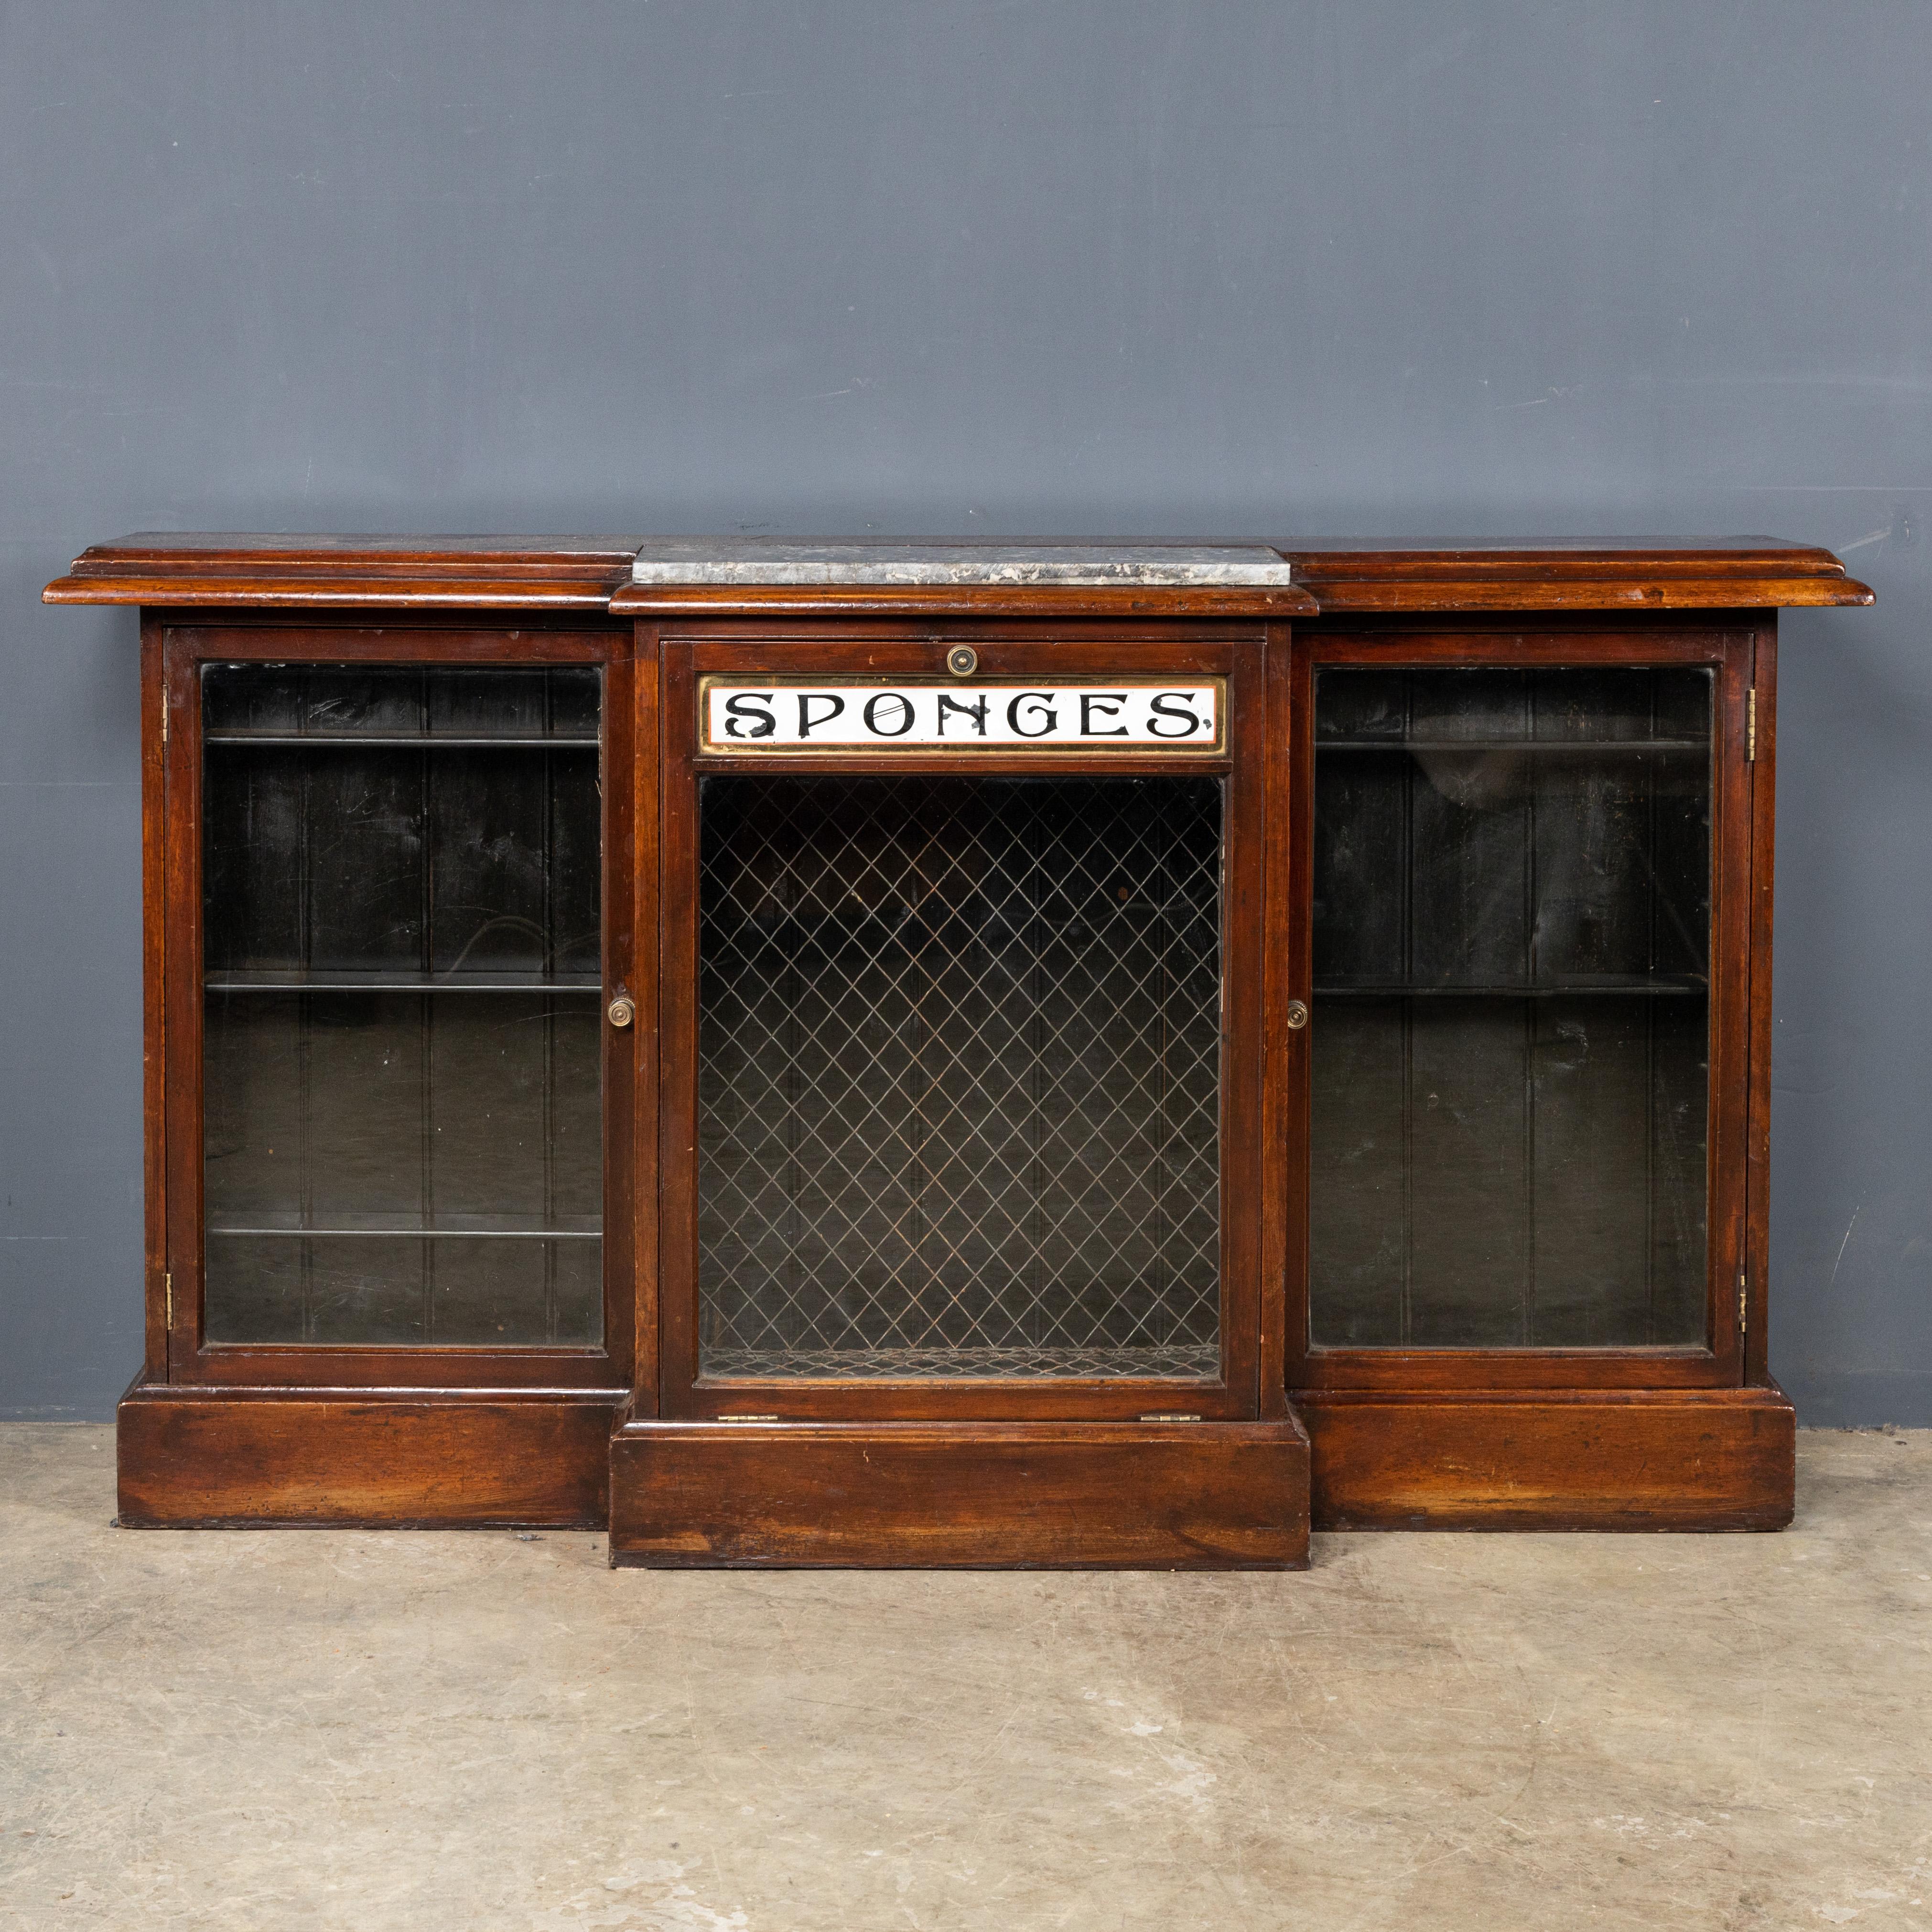 Antique mid-19th century Victorian display counter used in a chemist store to display and distribute sponges.

Condition
In great condition - wear as expected.

Size
Width: 160cm
Depth: 36cm
Height: 92cm